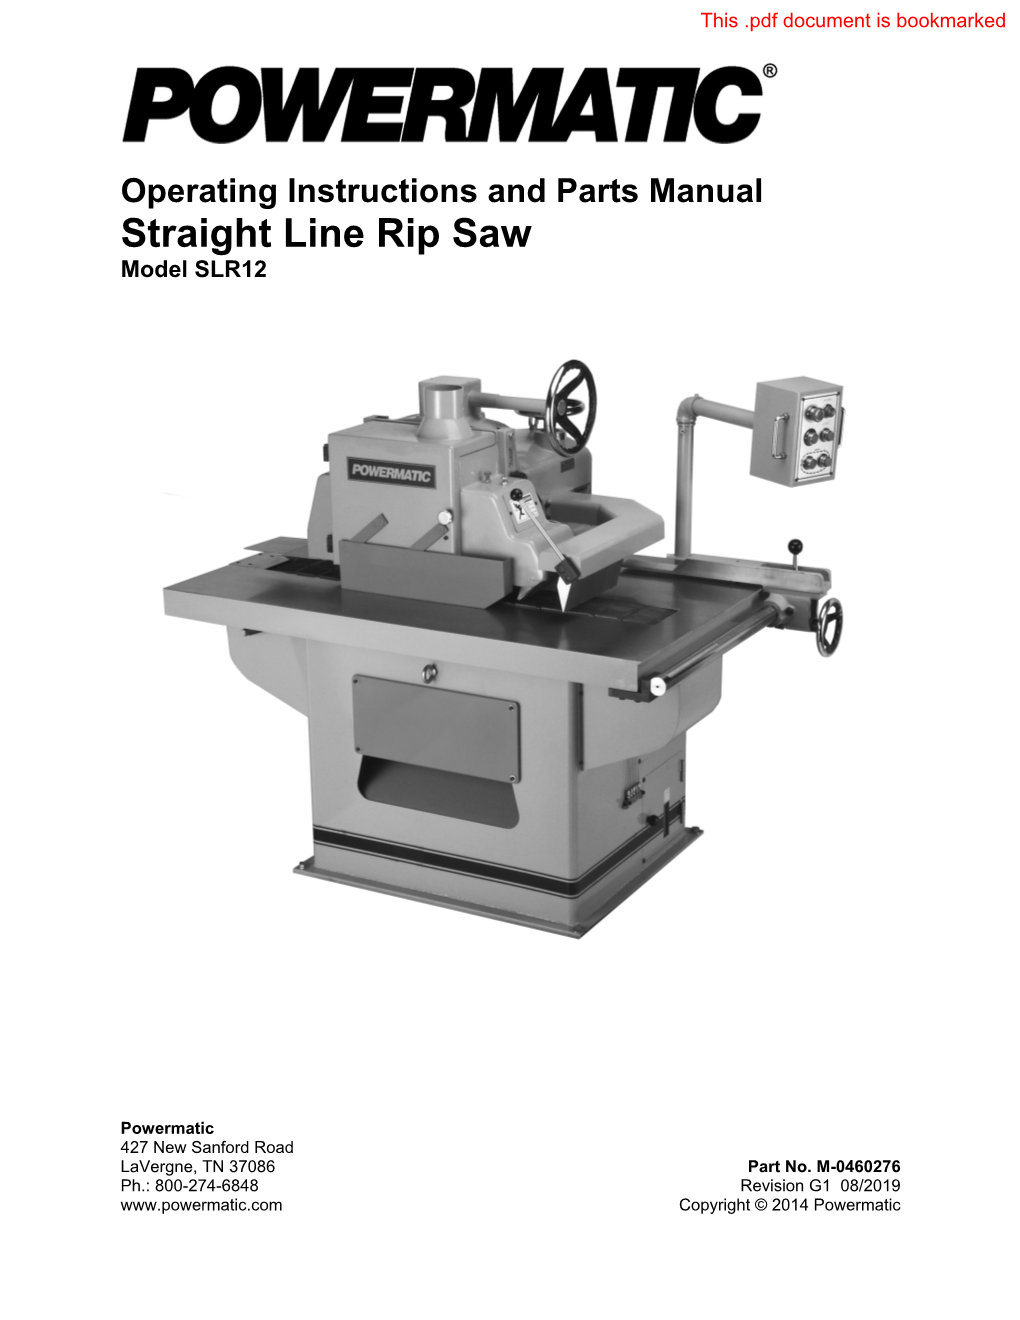 Operating Instructions and Parts Manual Straight Line Rip Saw Model SLR12